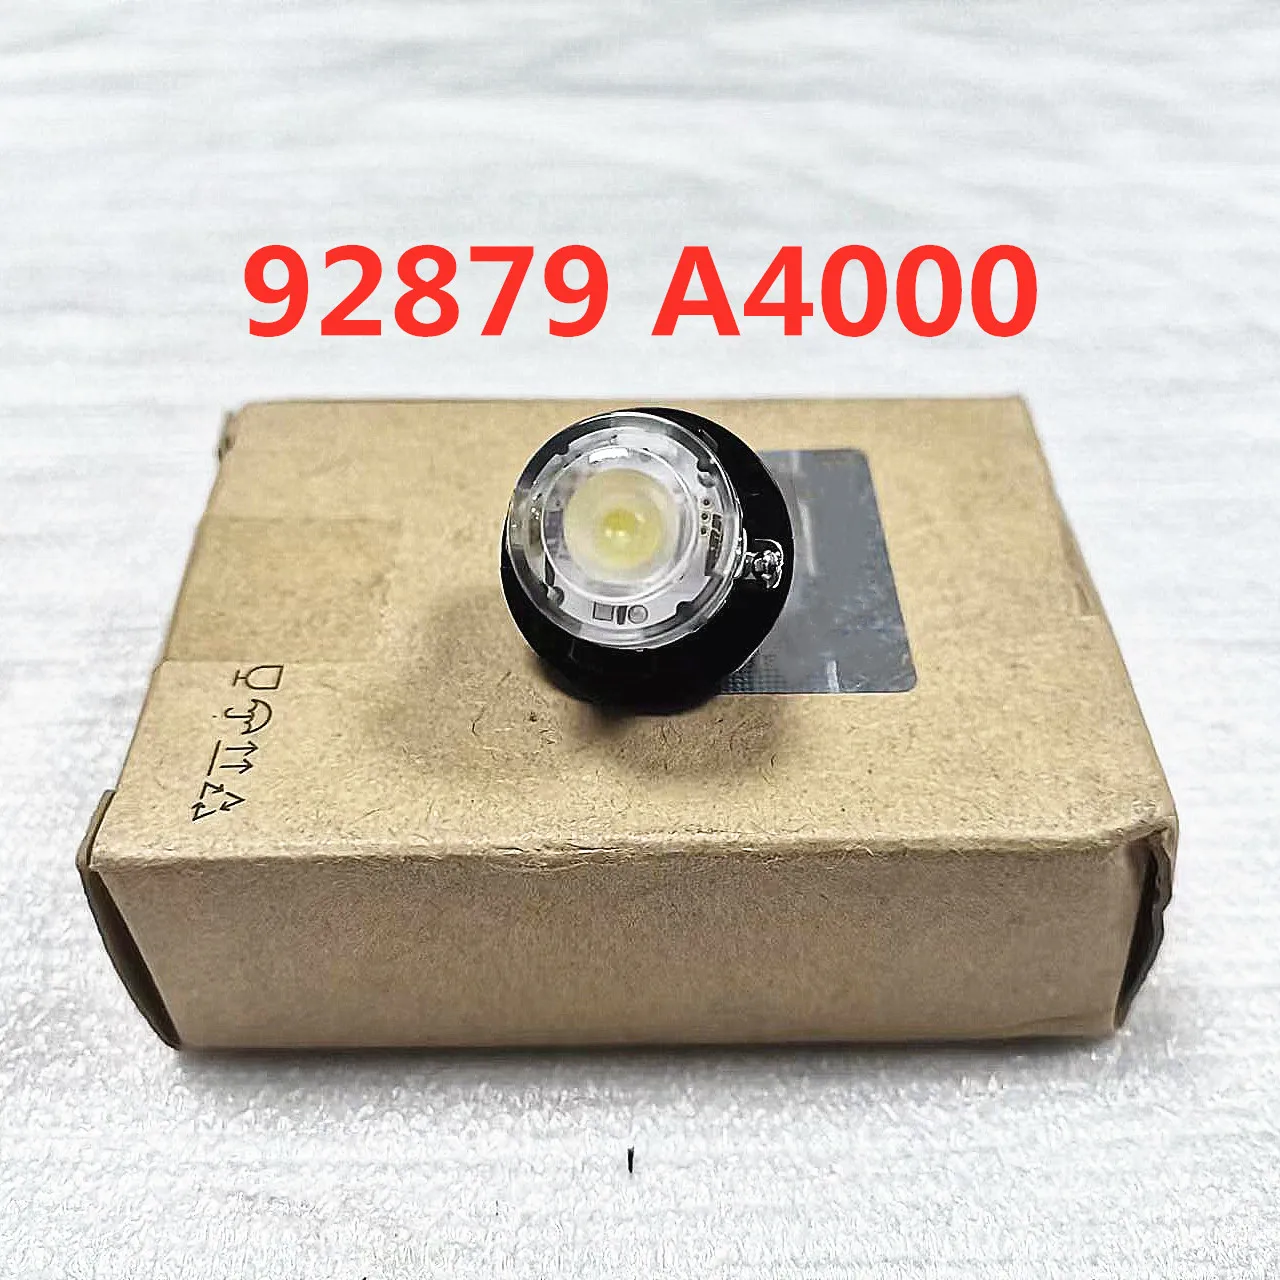 authentic Indoor Ceiling Lights LED Bulb for kia carens 2014-2017 92879A4000 92879 A4000 92879-A4000